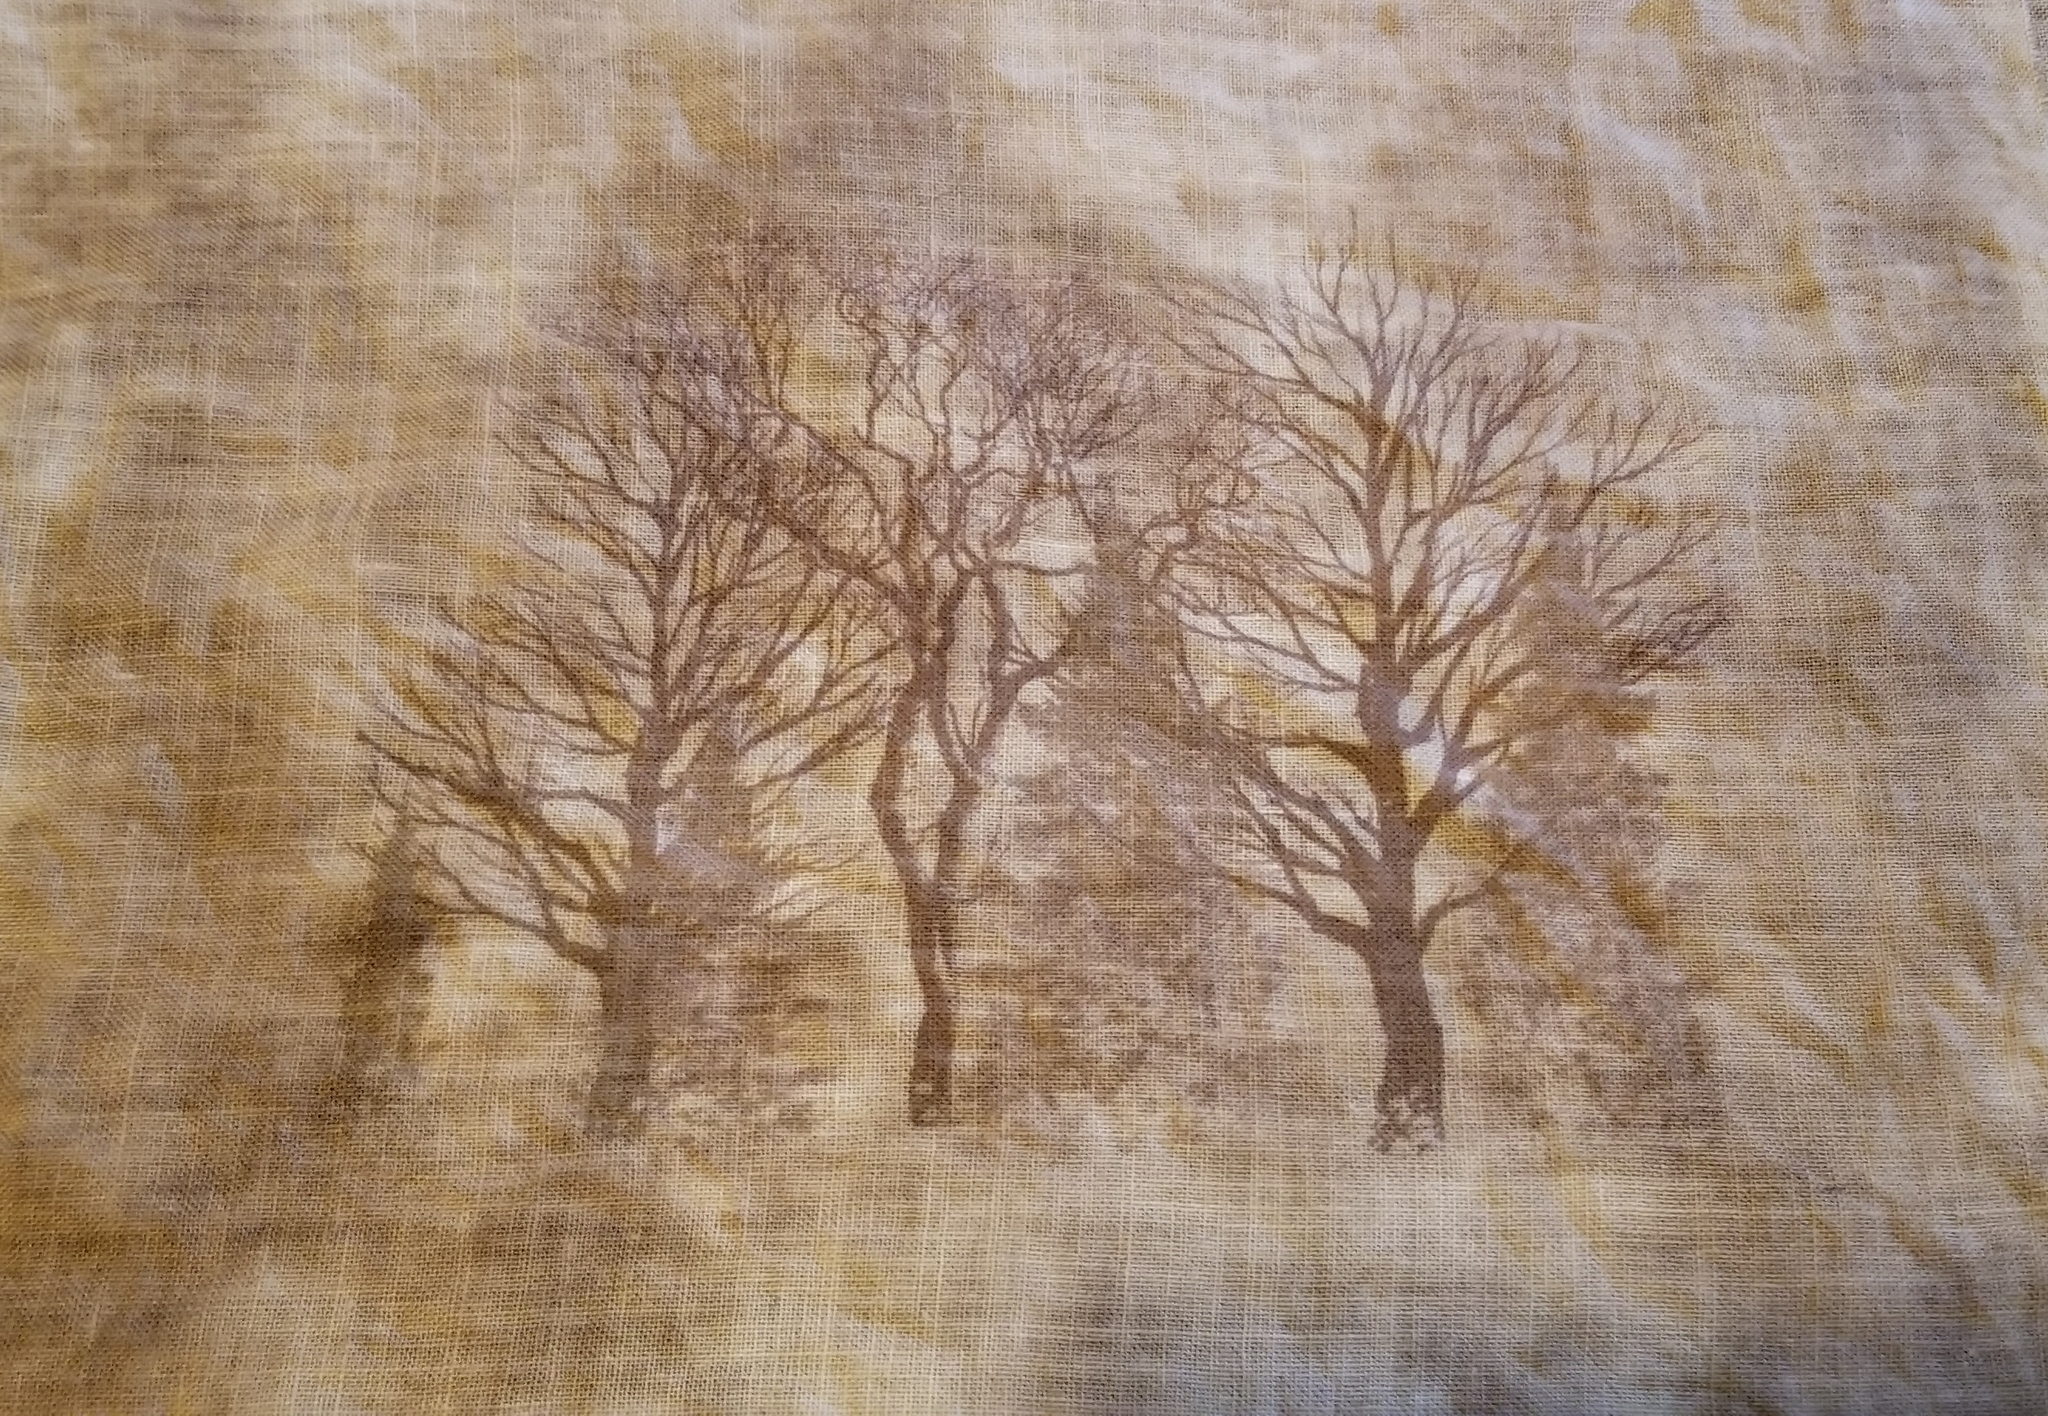 Hand Dyed Fabric - Sepia - Shades